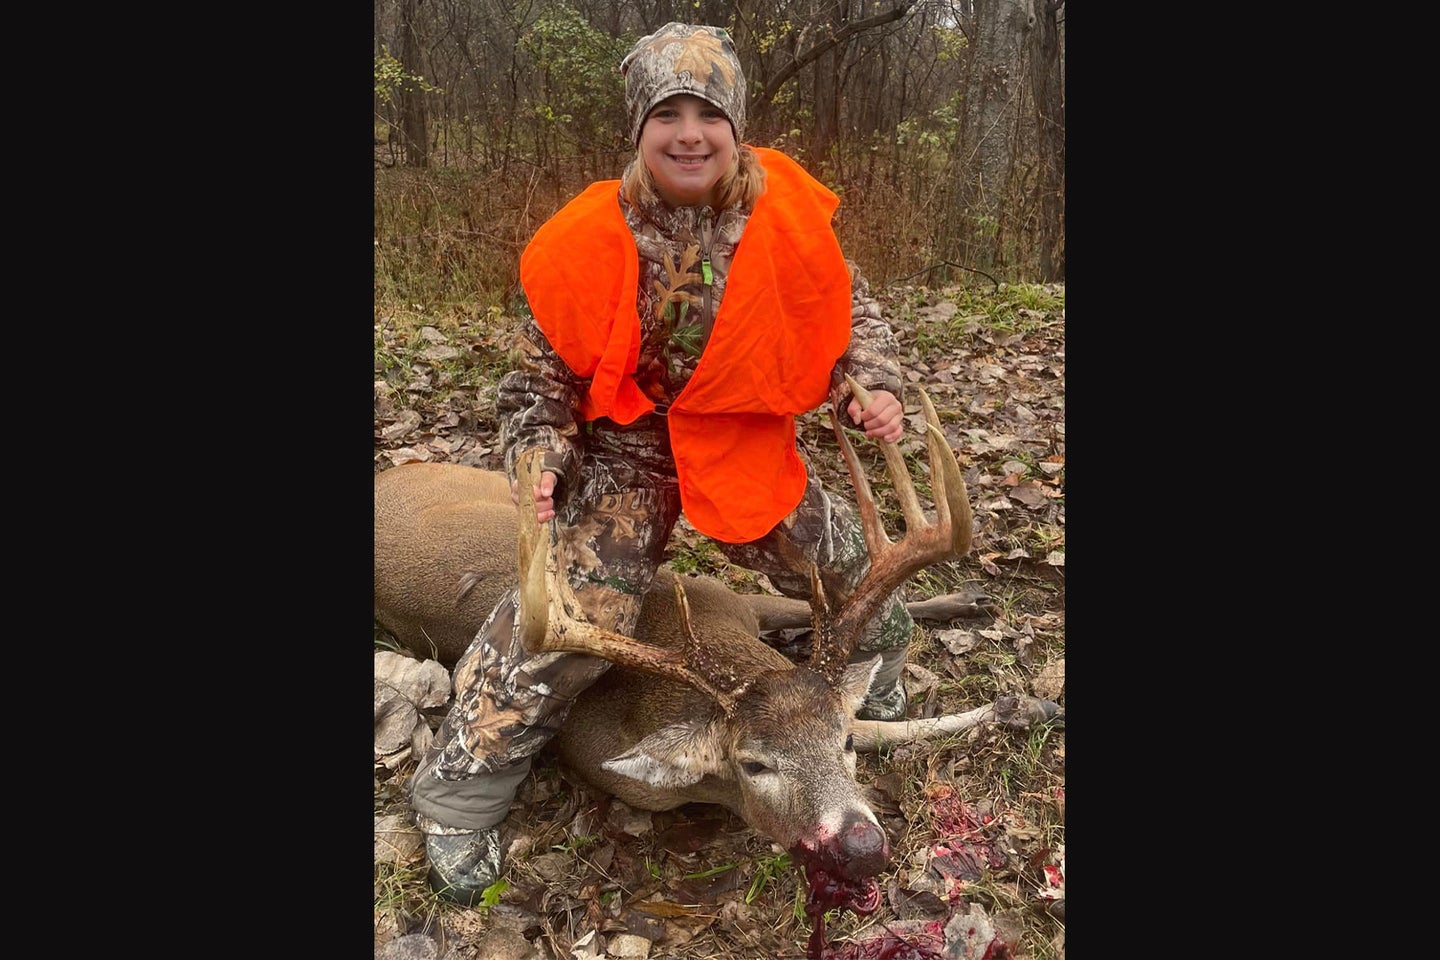 A 10-year-old hunter poses with an 11-point buck.